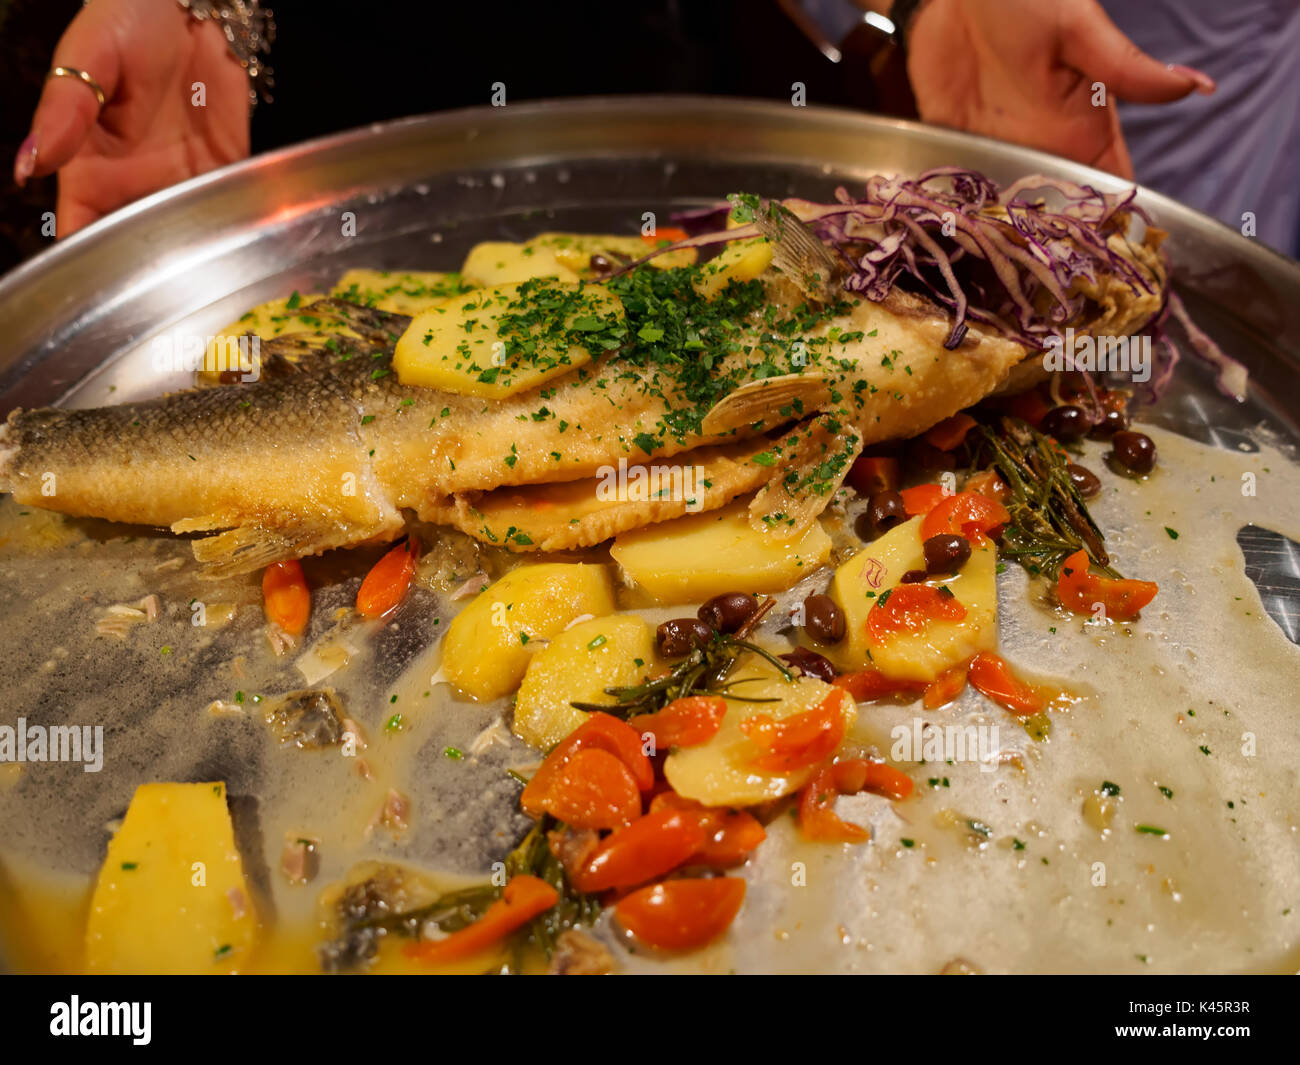 Whole sea bass with vegetables Stock Photo